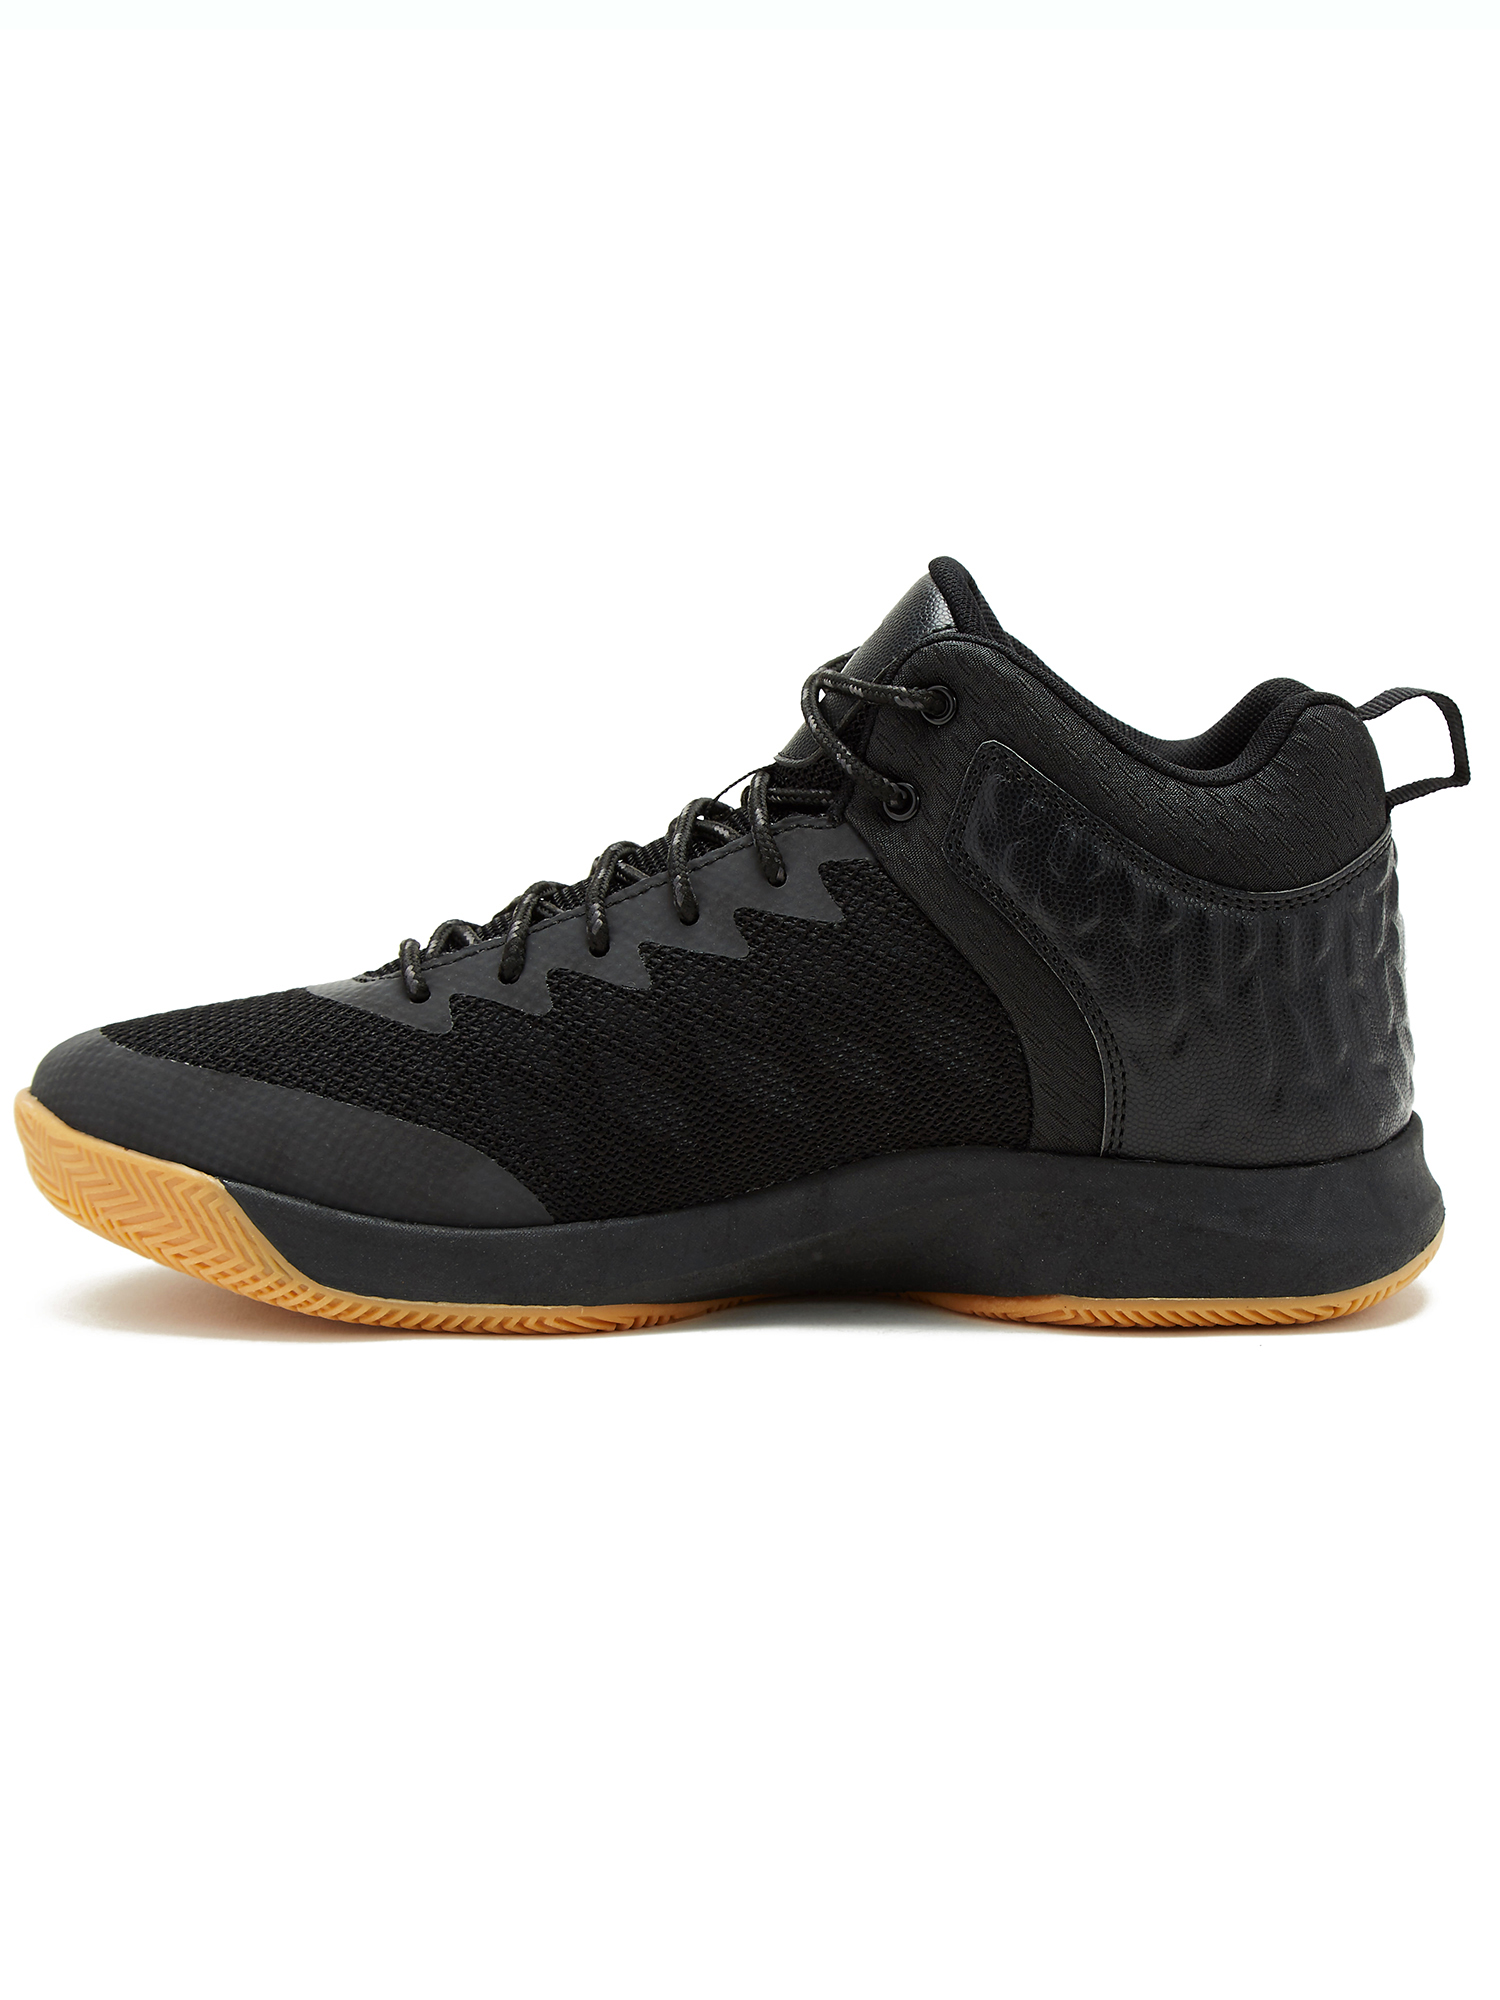 AND 1 Men's Court Shoe - image 2 of 3